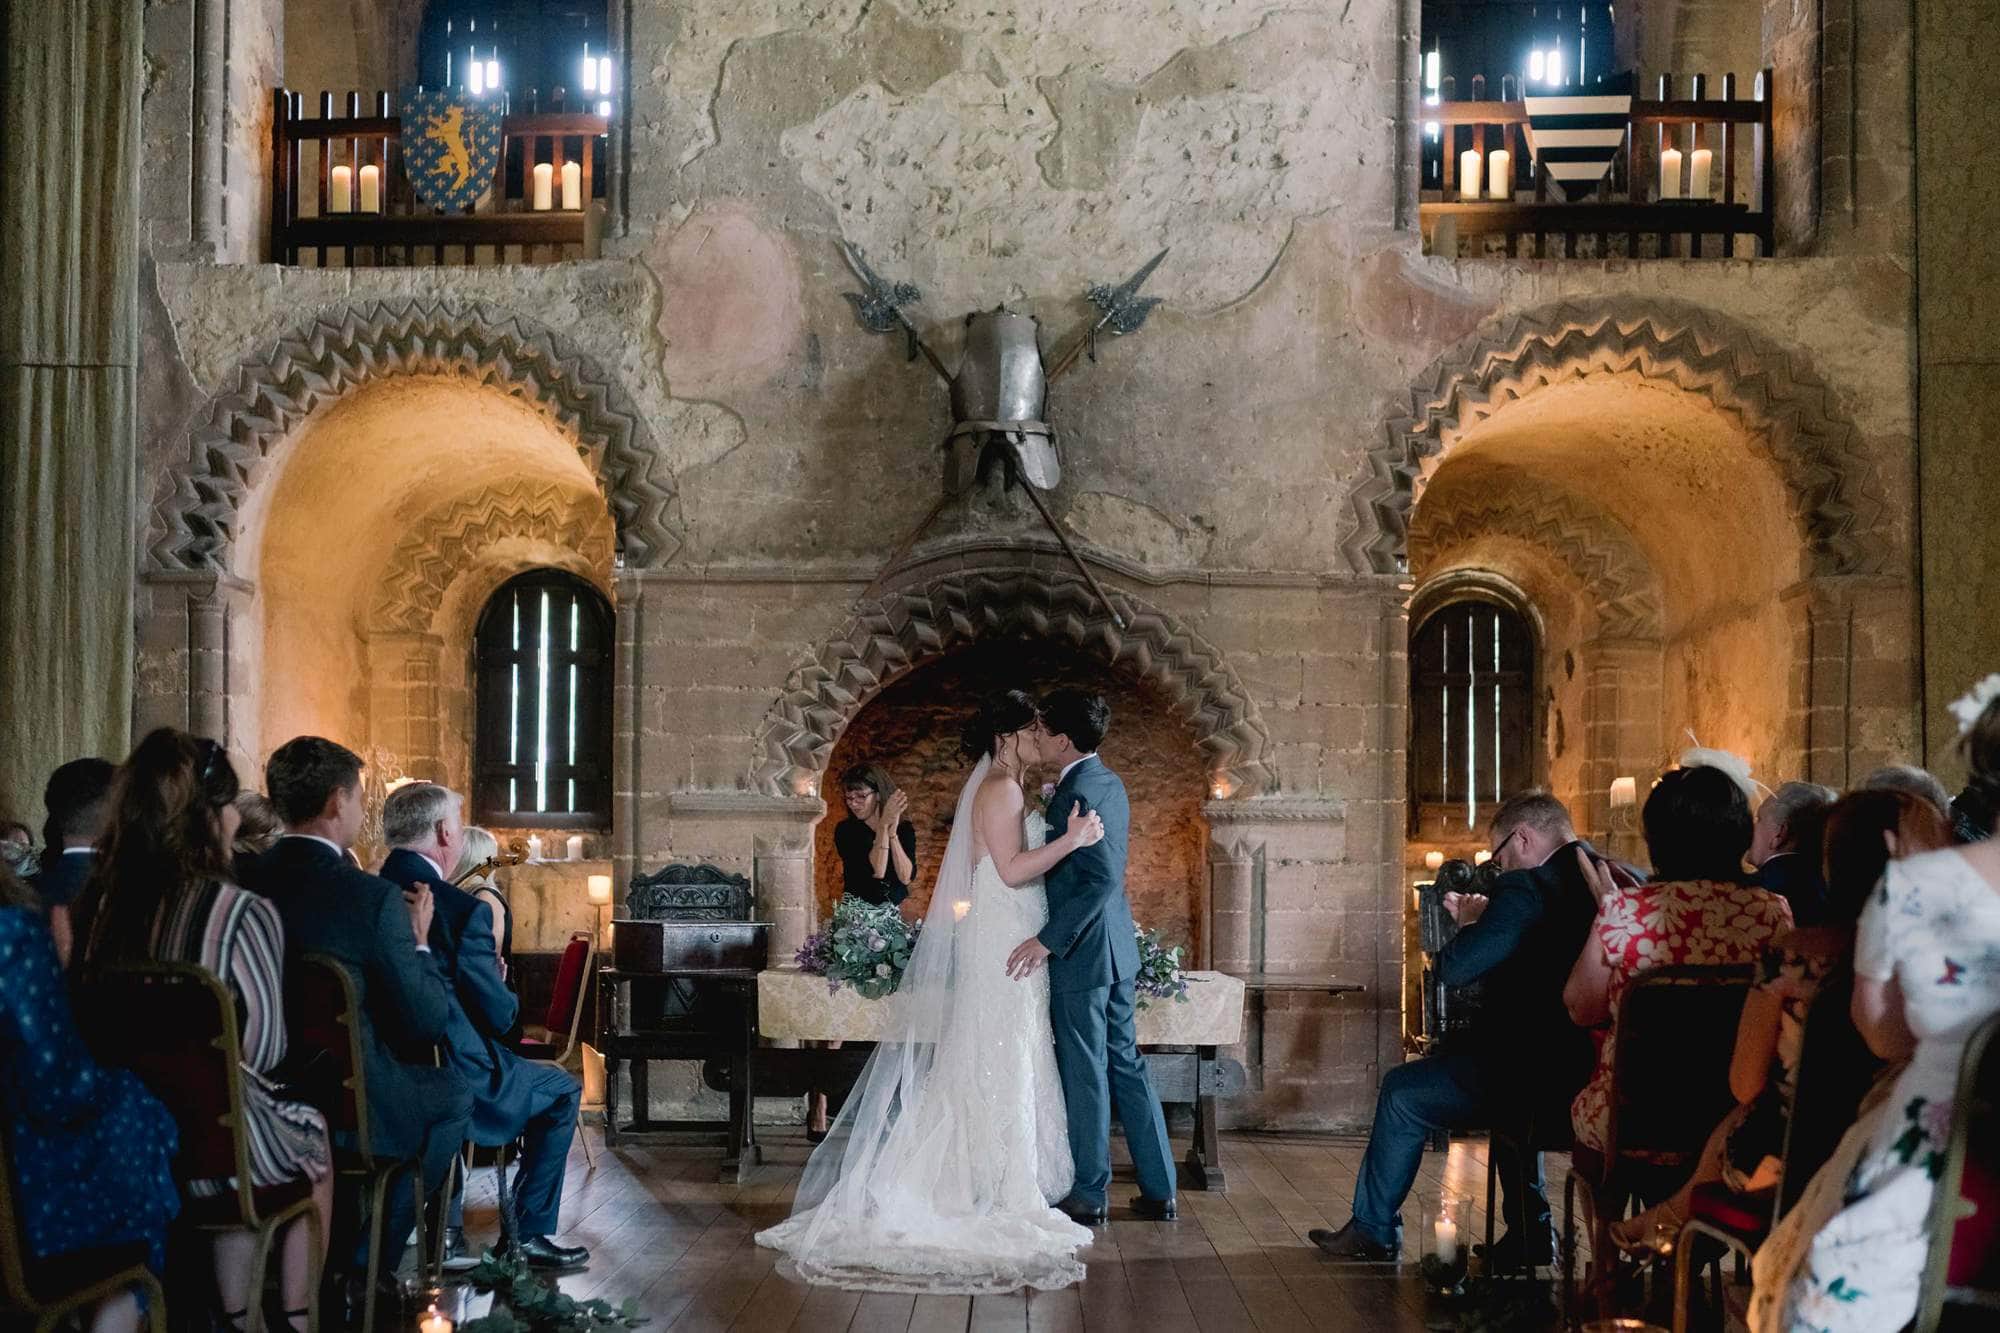 Bride and groom kiss during their wedding ceremony in the castle.